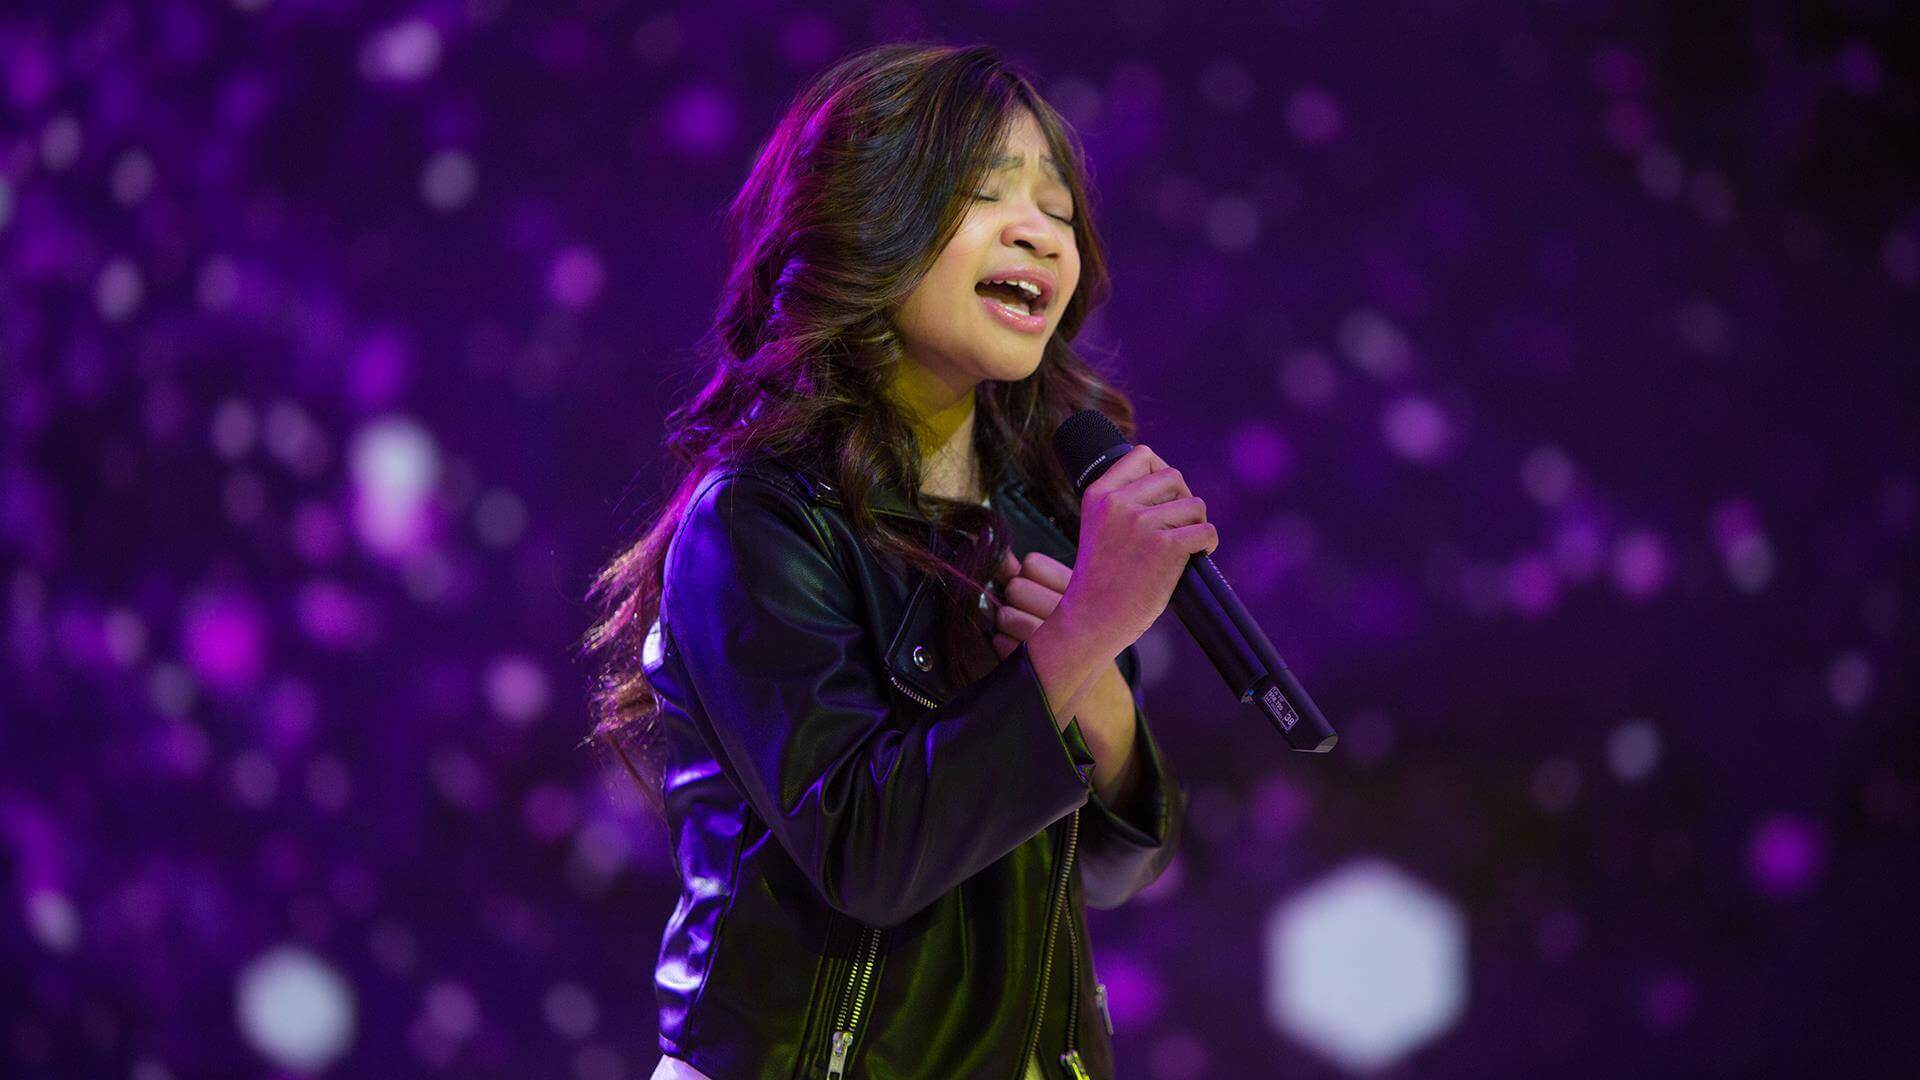 Facts on 'America's Got Talent: The Champions' Finalist Angelica Hale